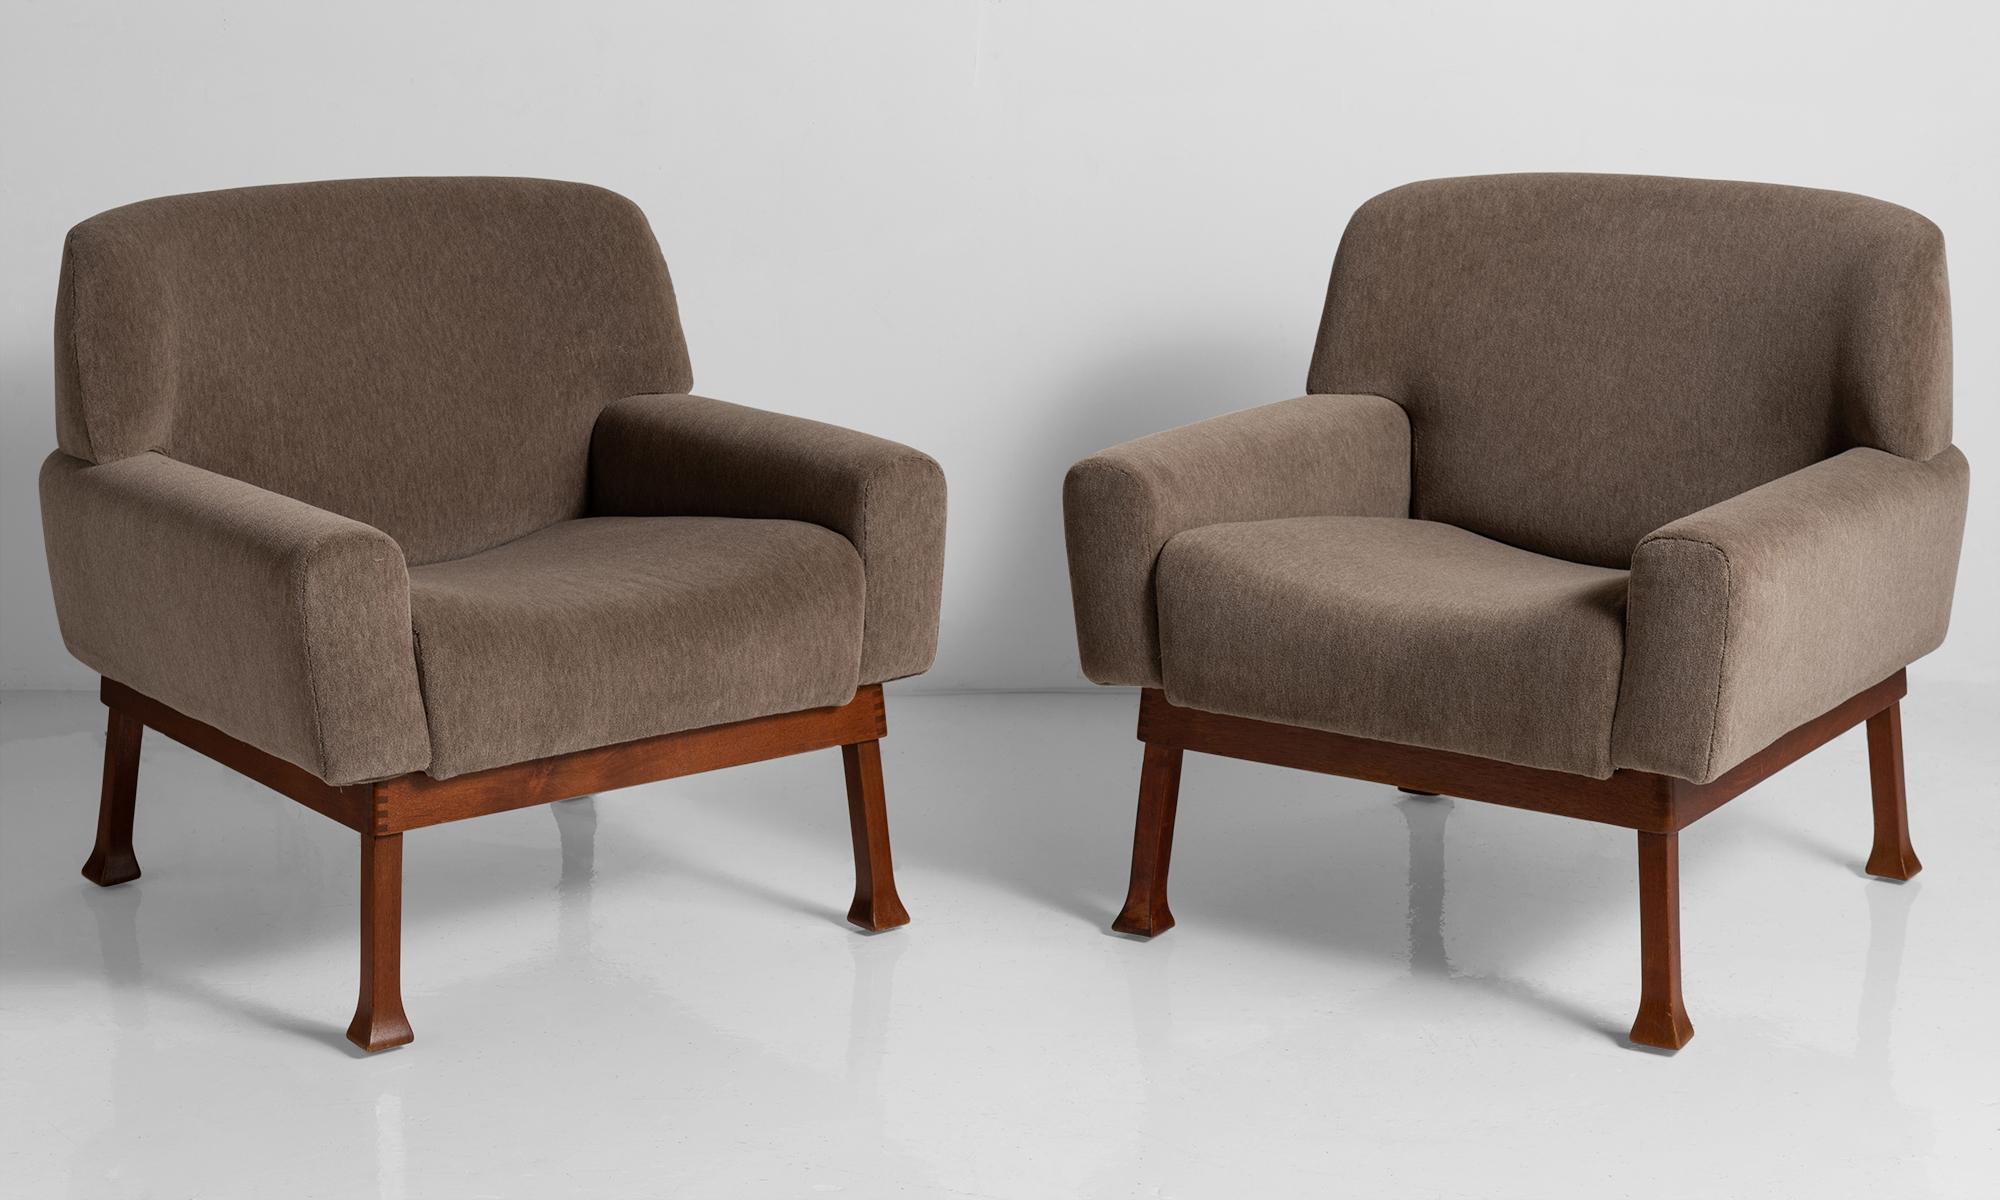 Piero Ranzani armchairs, Italy circa 1950.

Newly upholstered in brown mohair by Maharam, on original teak frame.